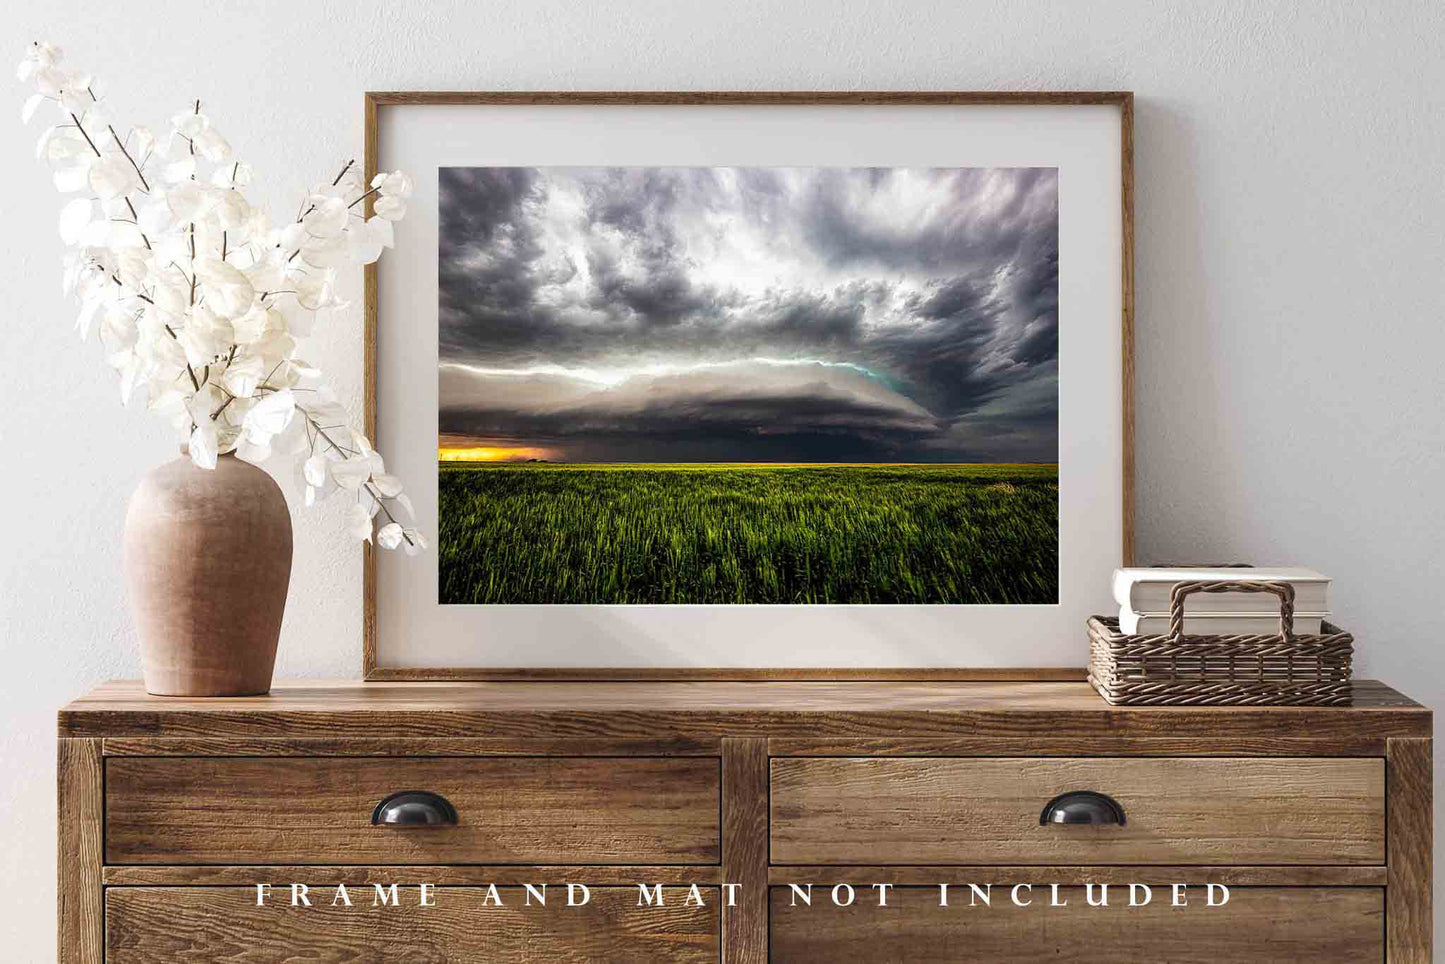 Storm Photography Print - Picture of Supercell Thunderstorm Over Wheat Field on Spring Day in Kansas - Weather Wall Art Decor Photo Artwork